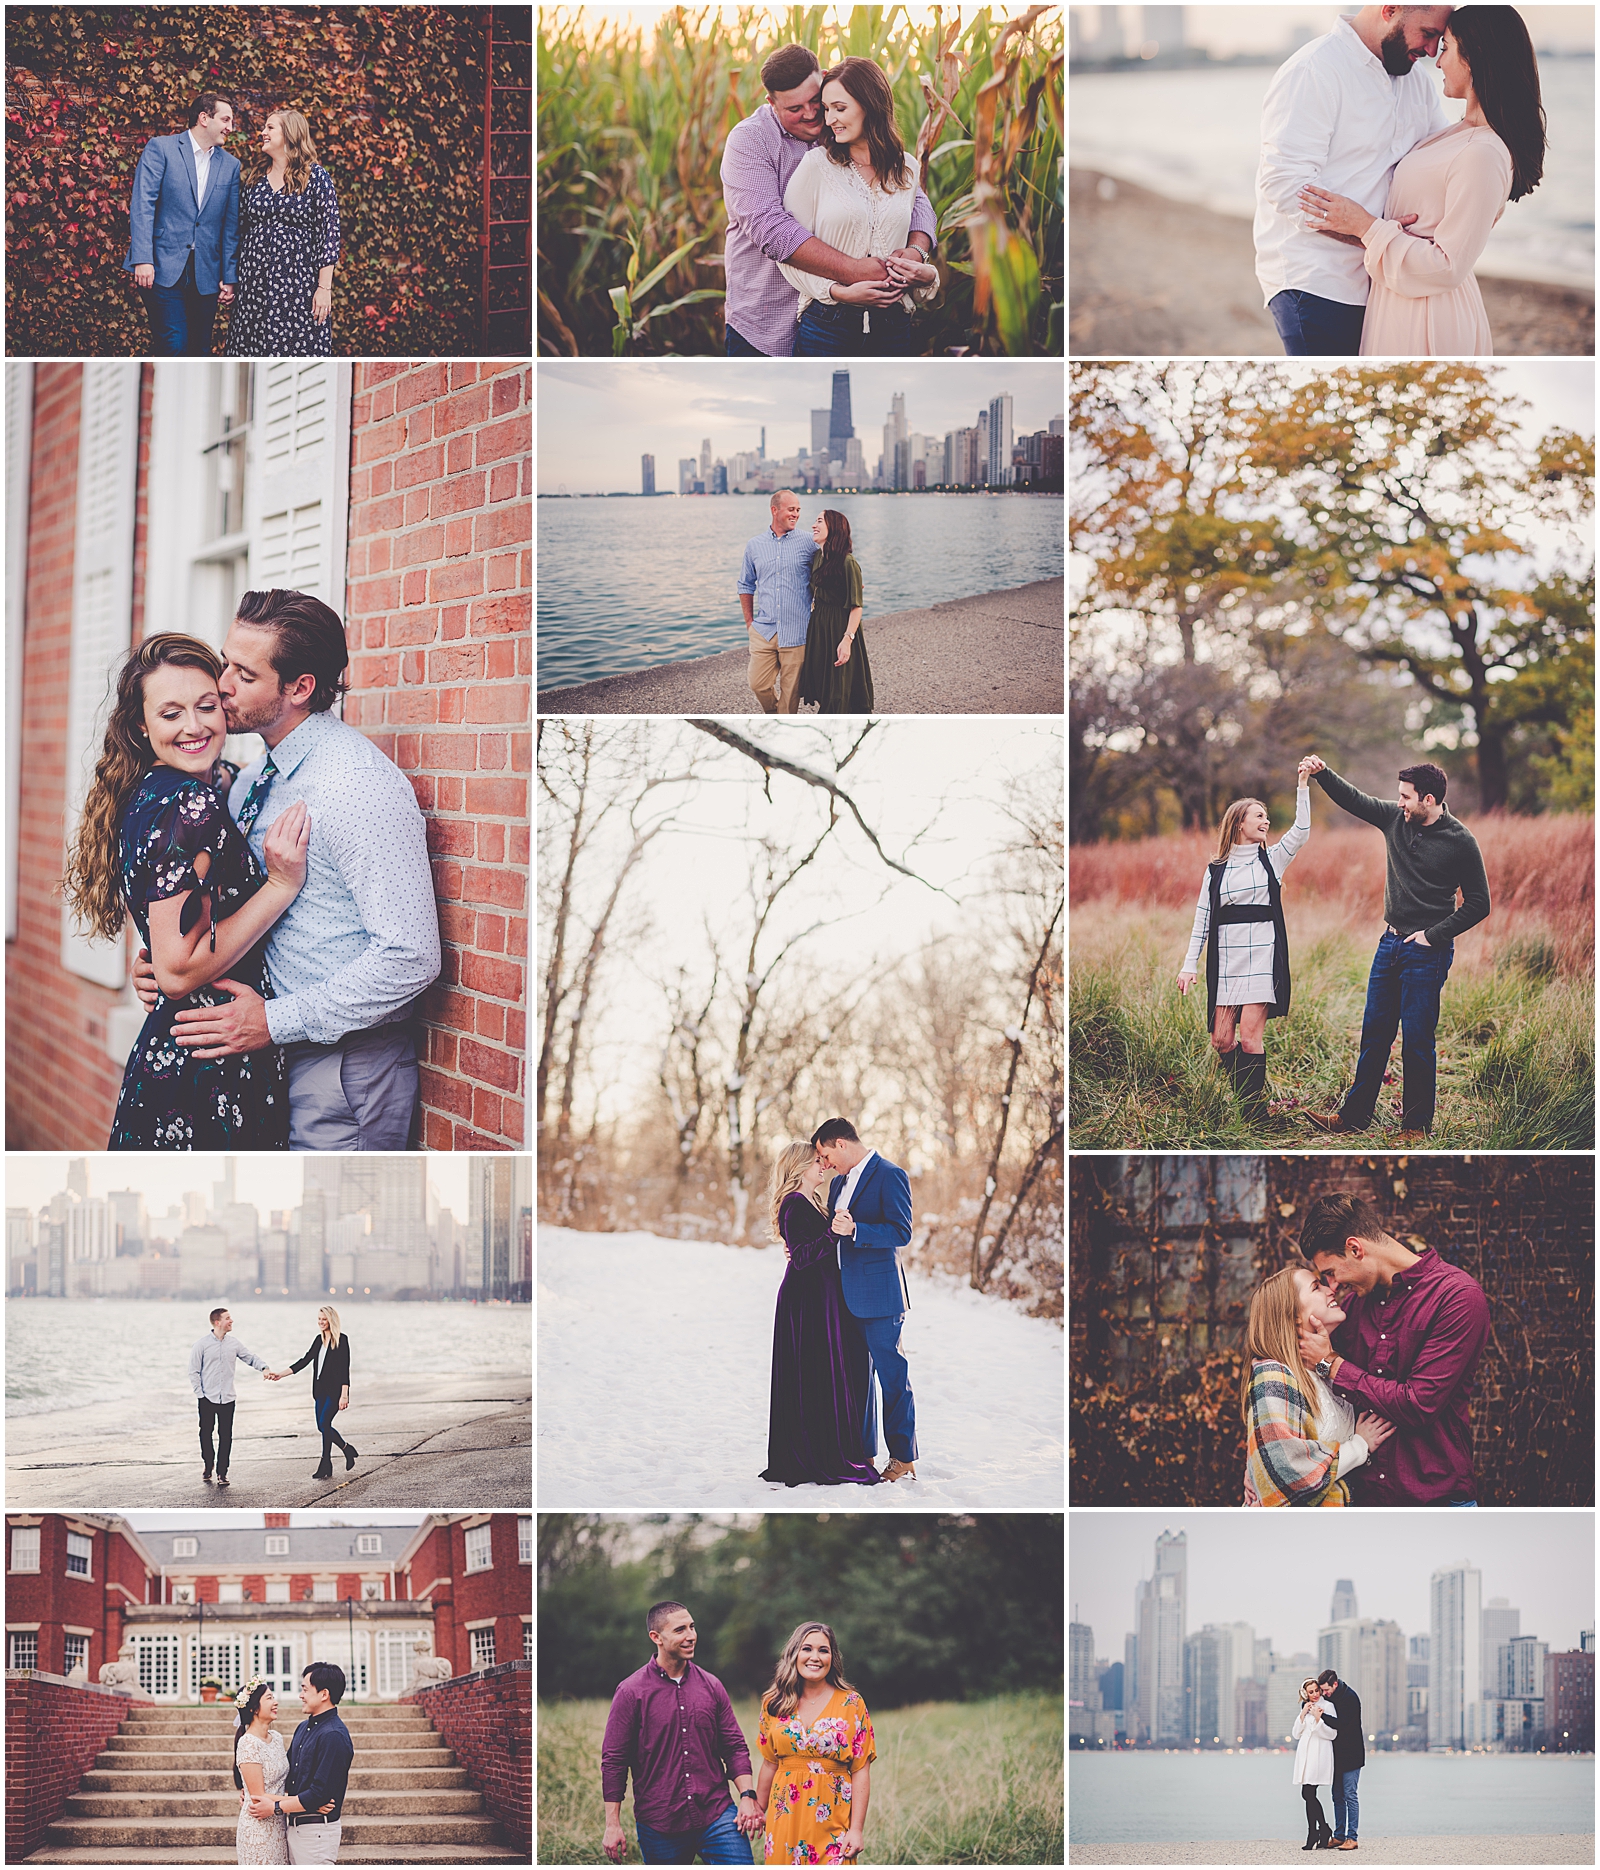 Engagements of 2019 recap with Kara Evans Photographer - engagement photos in Chicagoland and Central Illinois with Kara Evans.